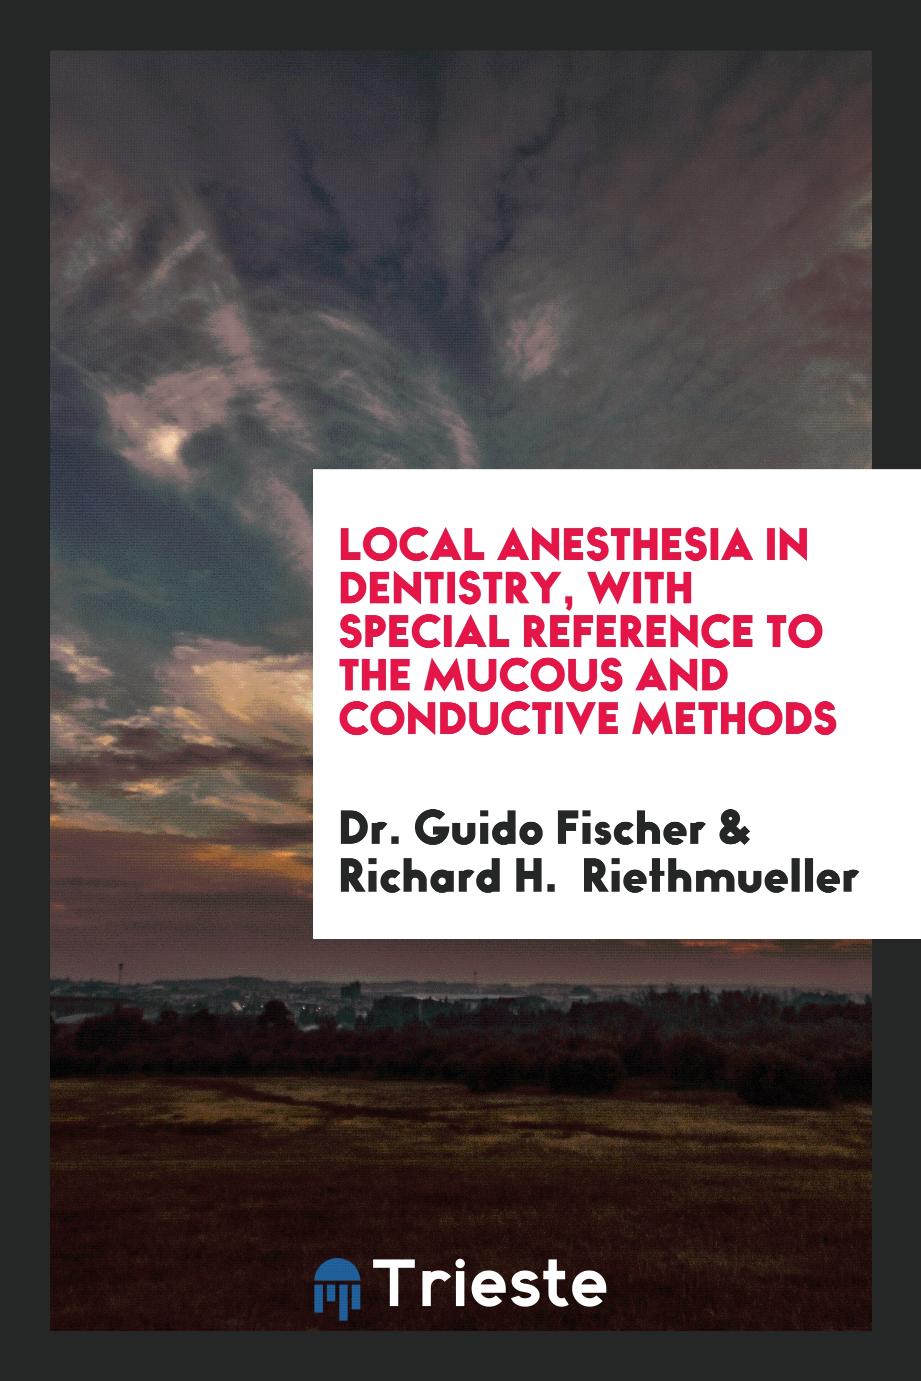 Local Anesthesia in Dentistry, with Special Reference to the Mucous and Conductive Methods